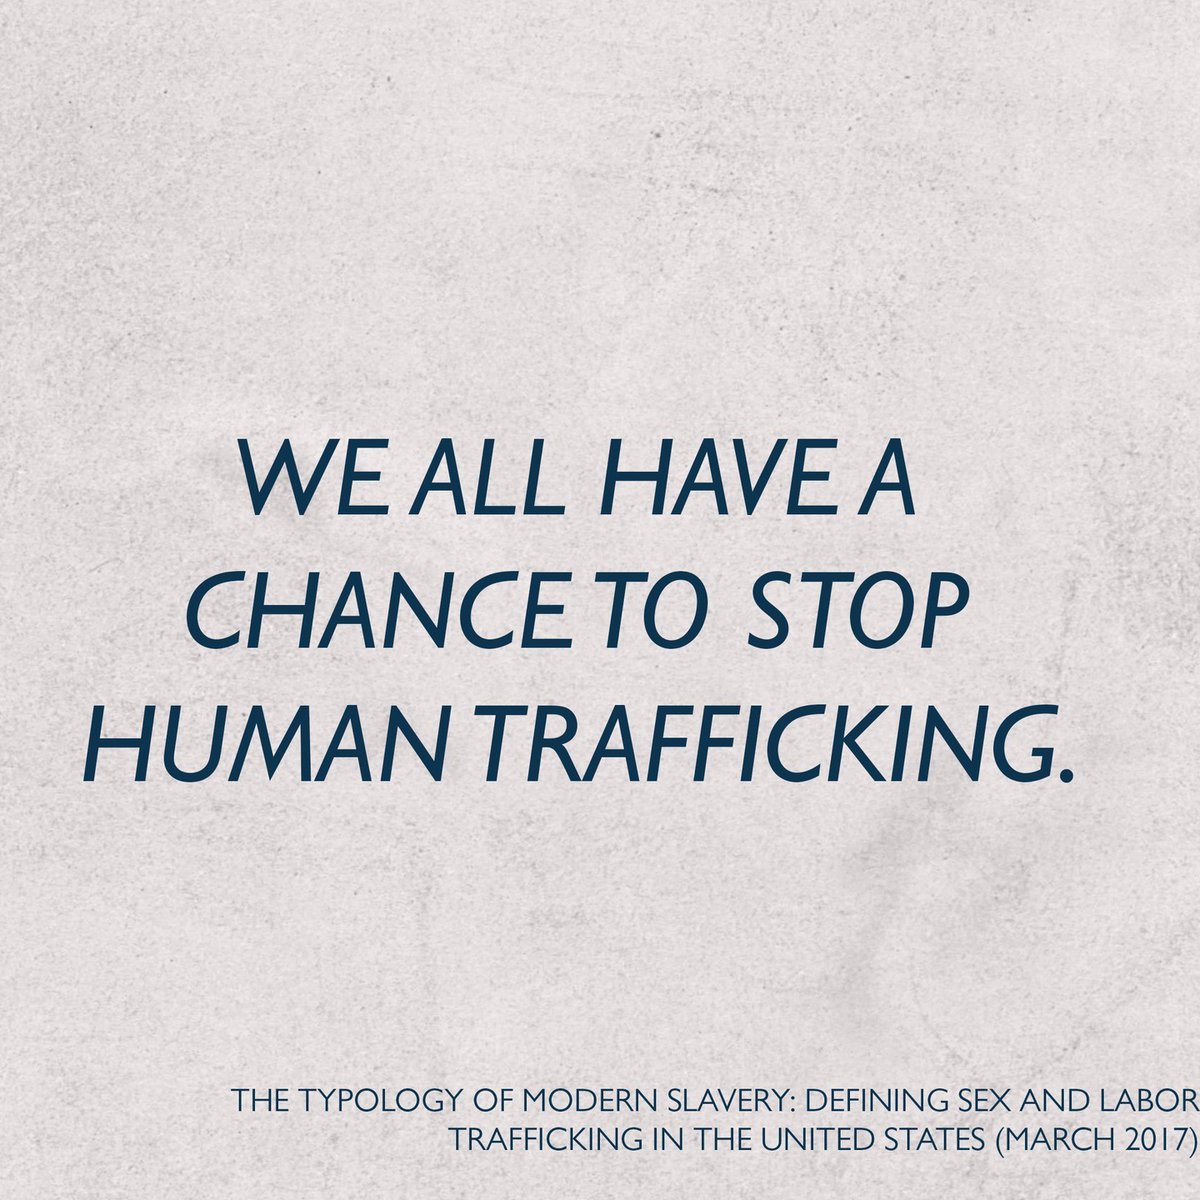 While this is not a comprehensive list of all the different ways people can be exploited, these are some of the largest industries where #HumanTrafficking occurs. Learn more from 'Polaris Typology of Modern Slavery' report